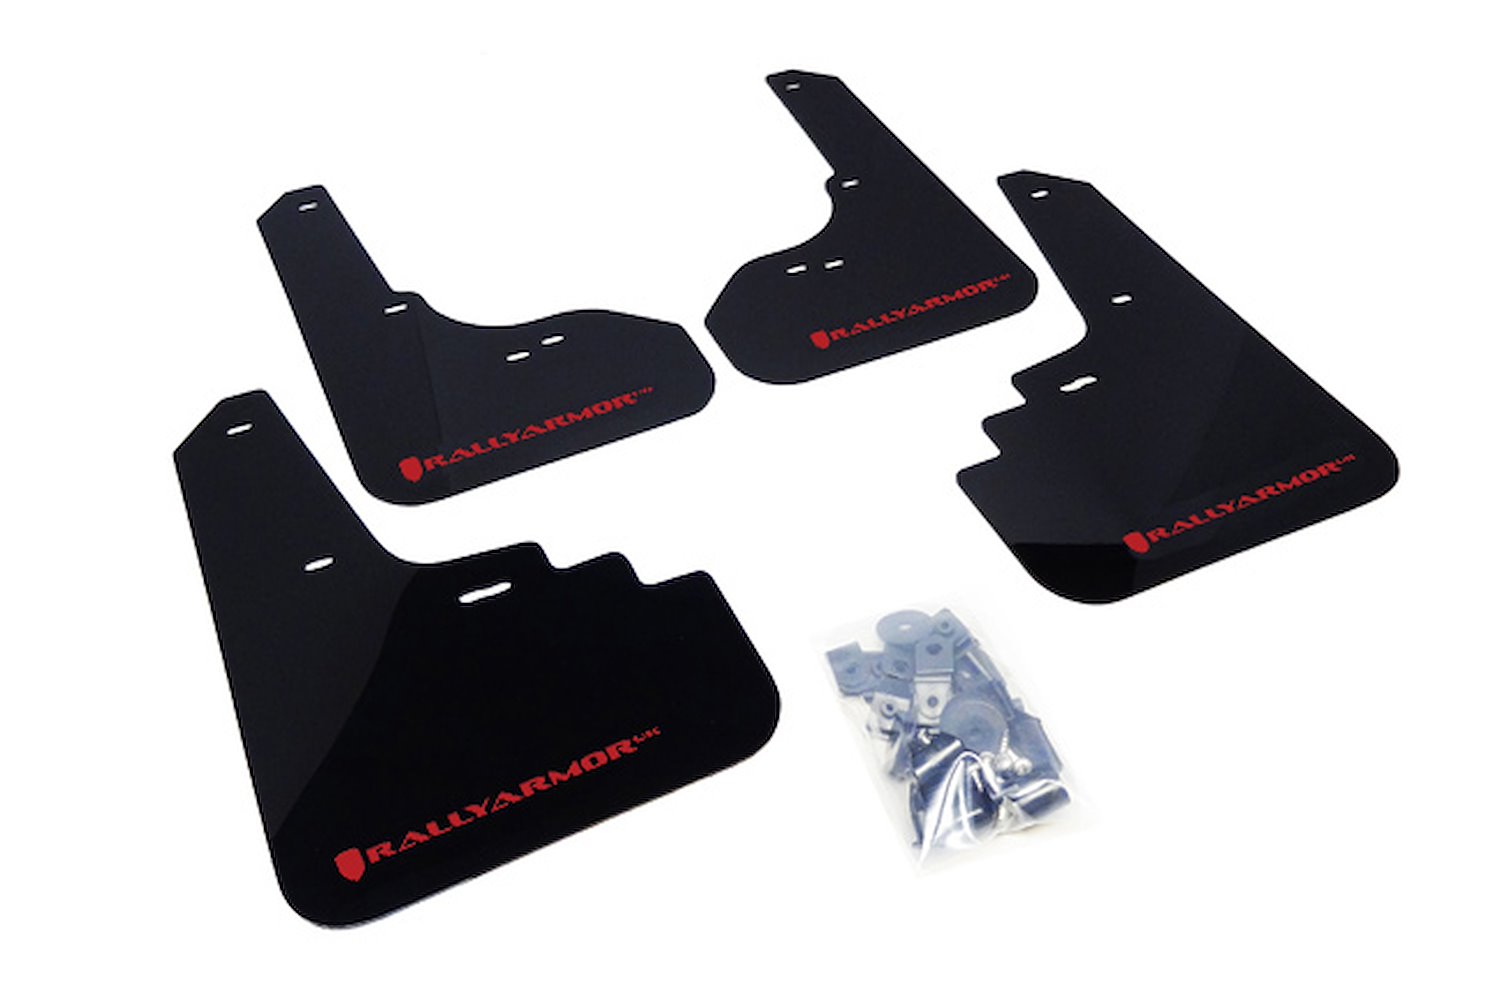 MF4URBLKRD Mud Flap Kit for 2005-2009 Subaru Outback Legacy/Legacy Outback - Red Logo